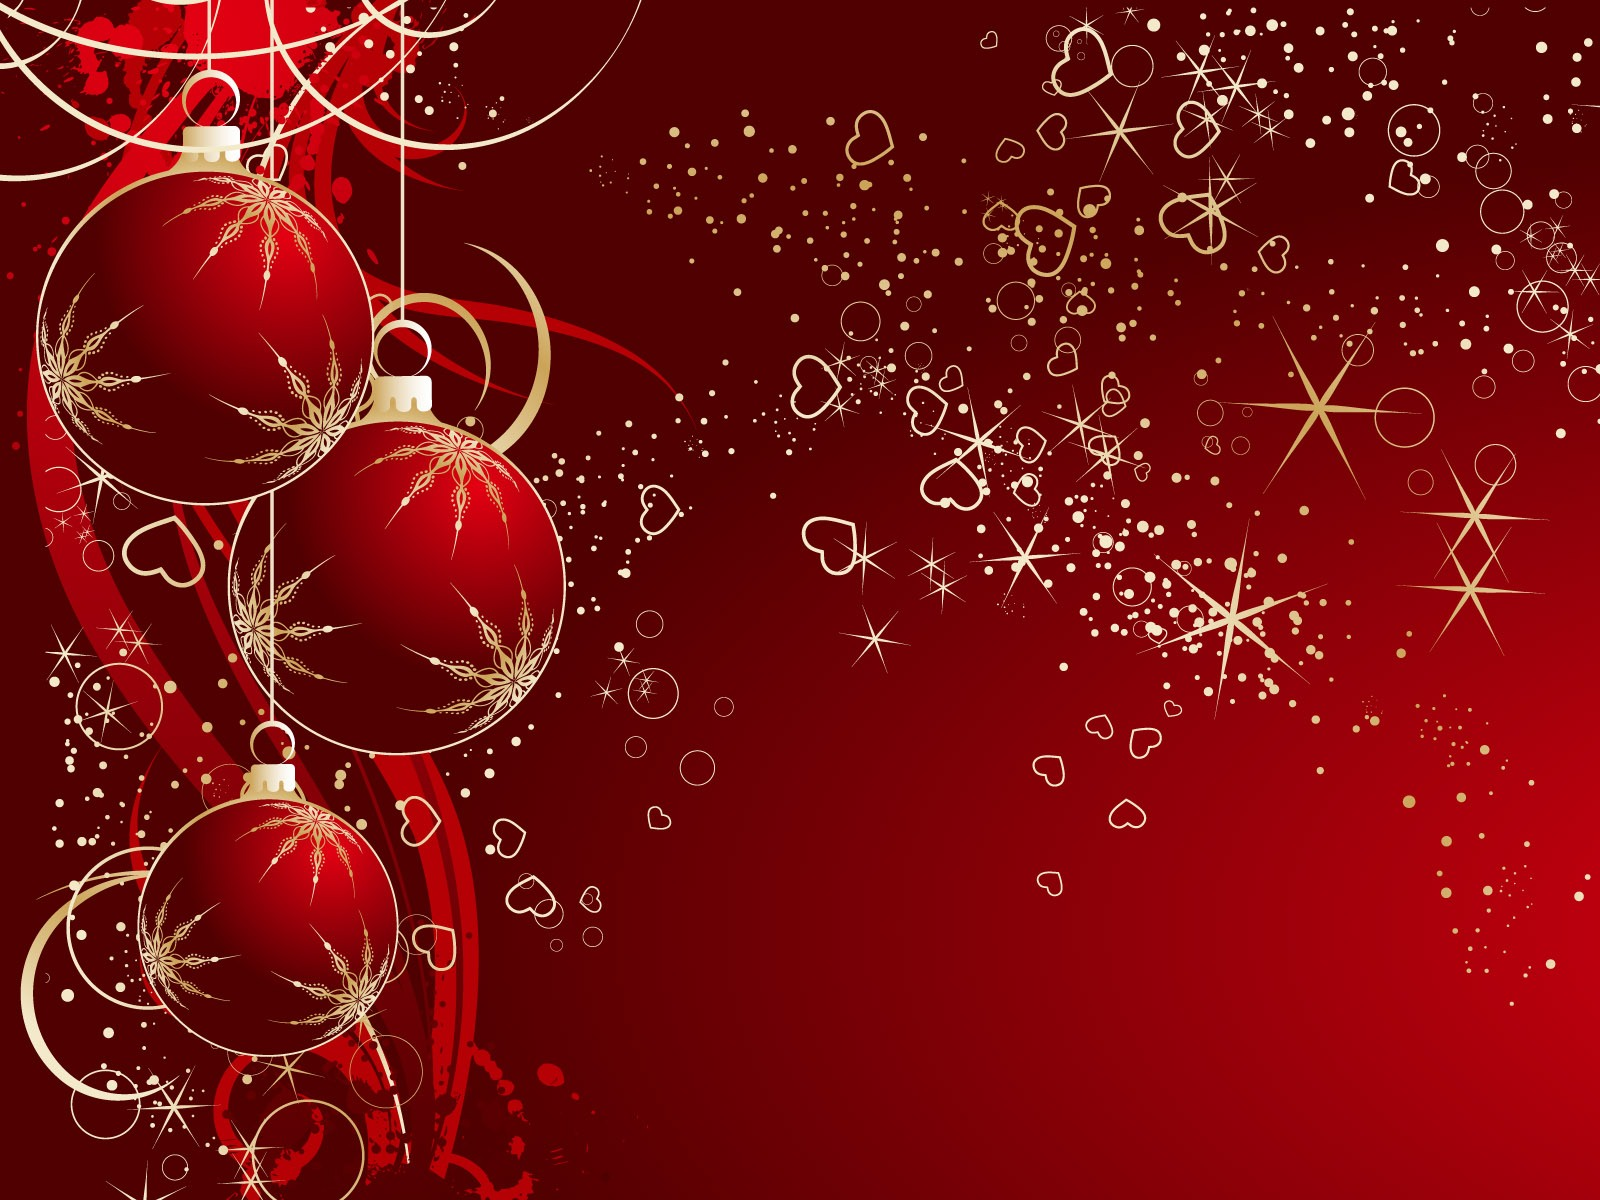 FreePhotoz Daily Wallpapers & Backgrounds - Red Christmas